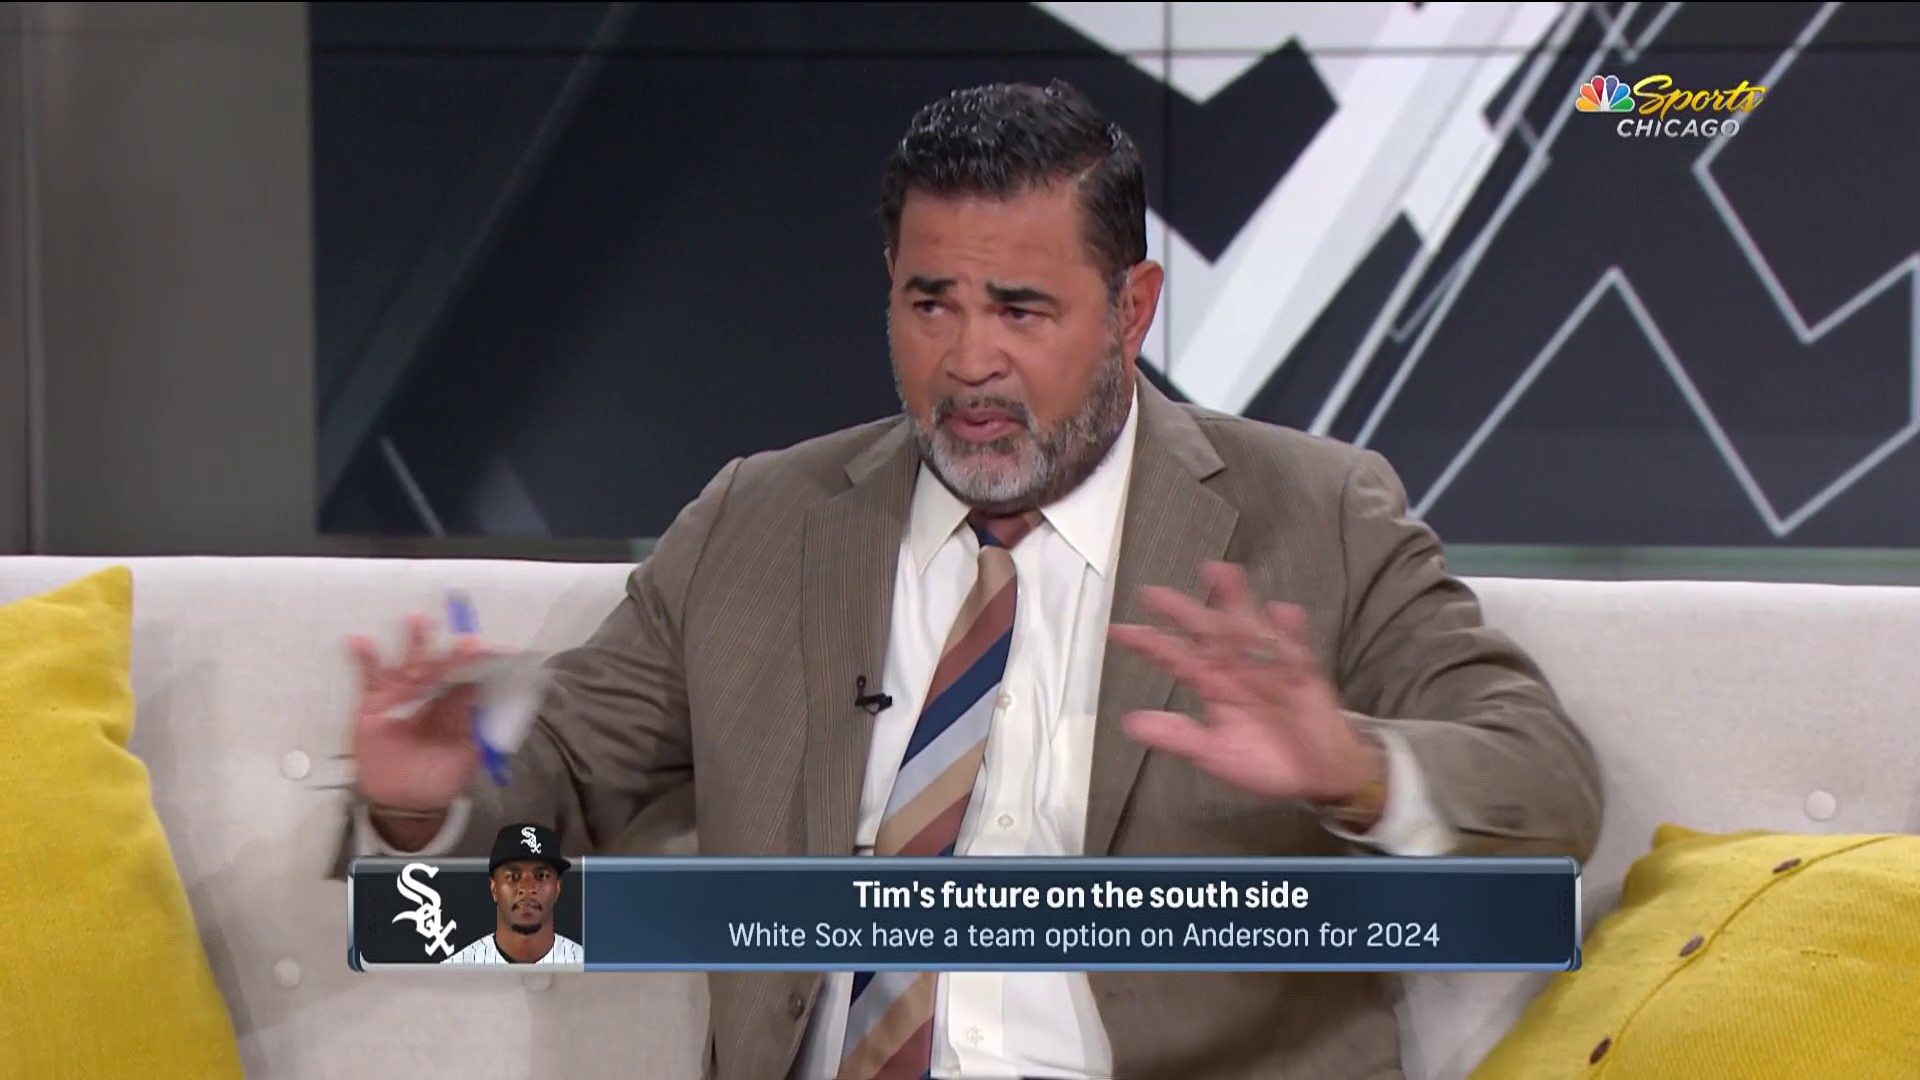 Ozzie Guillen on White Sox' Tim Anderson: 'I don't really care how